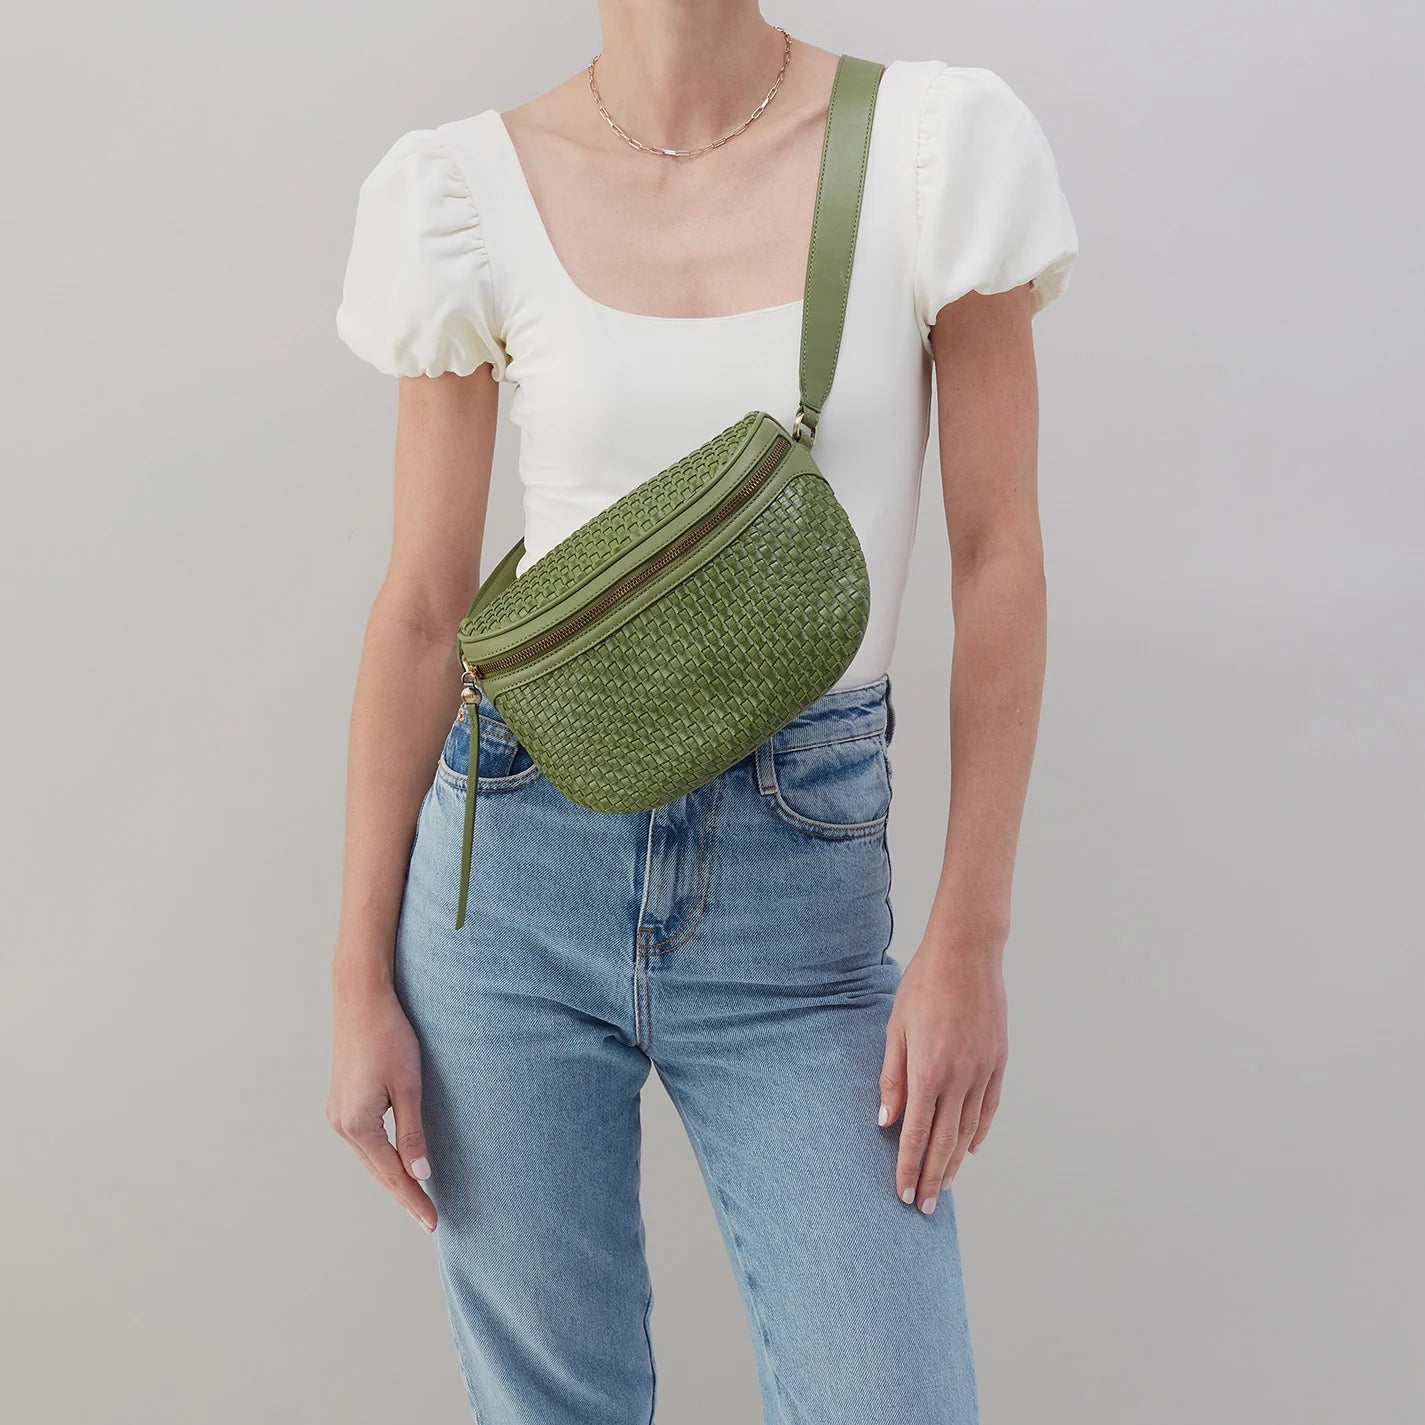 person wearing jeans and a white top with sweet basil juno bag across their chest.